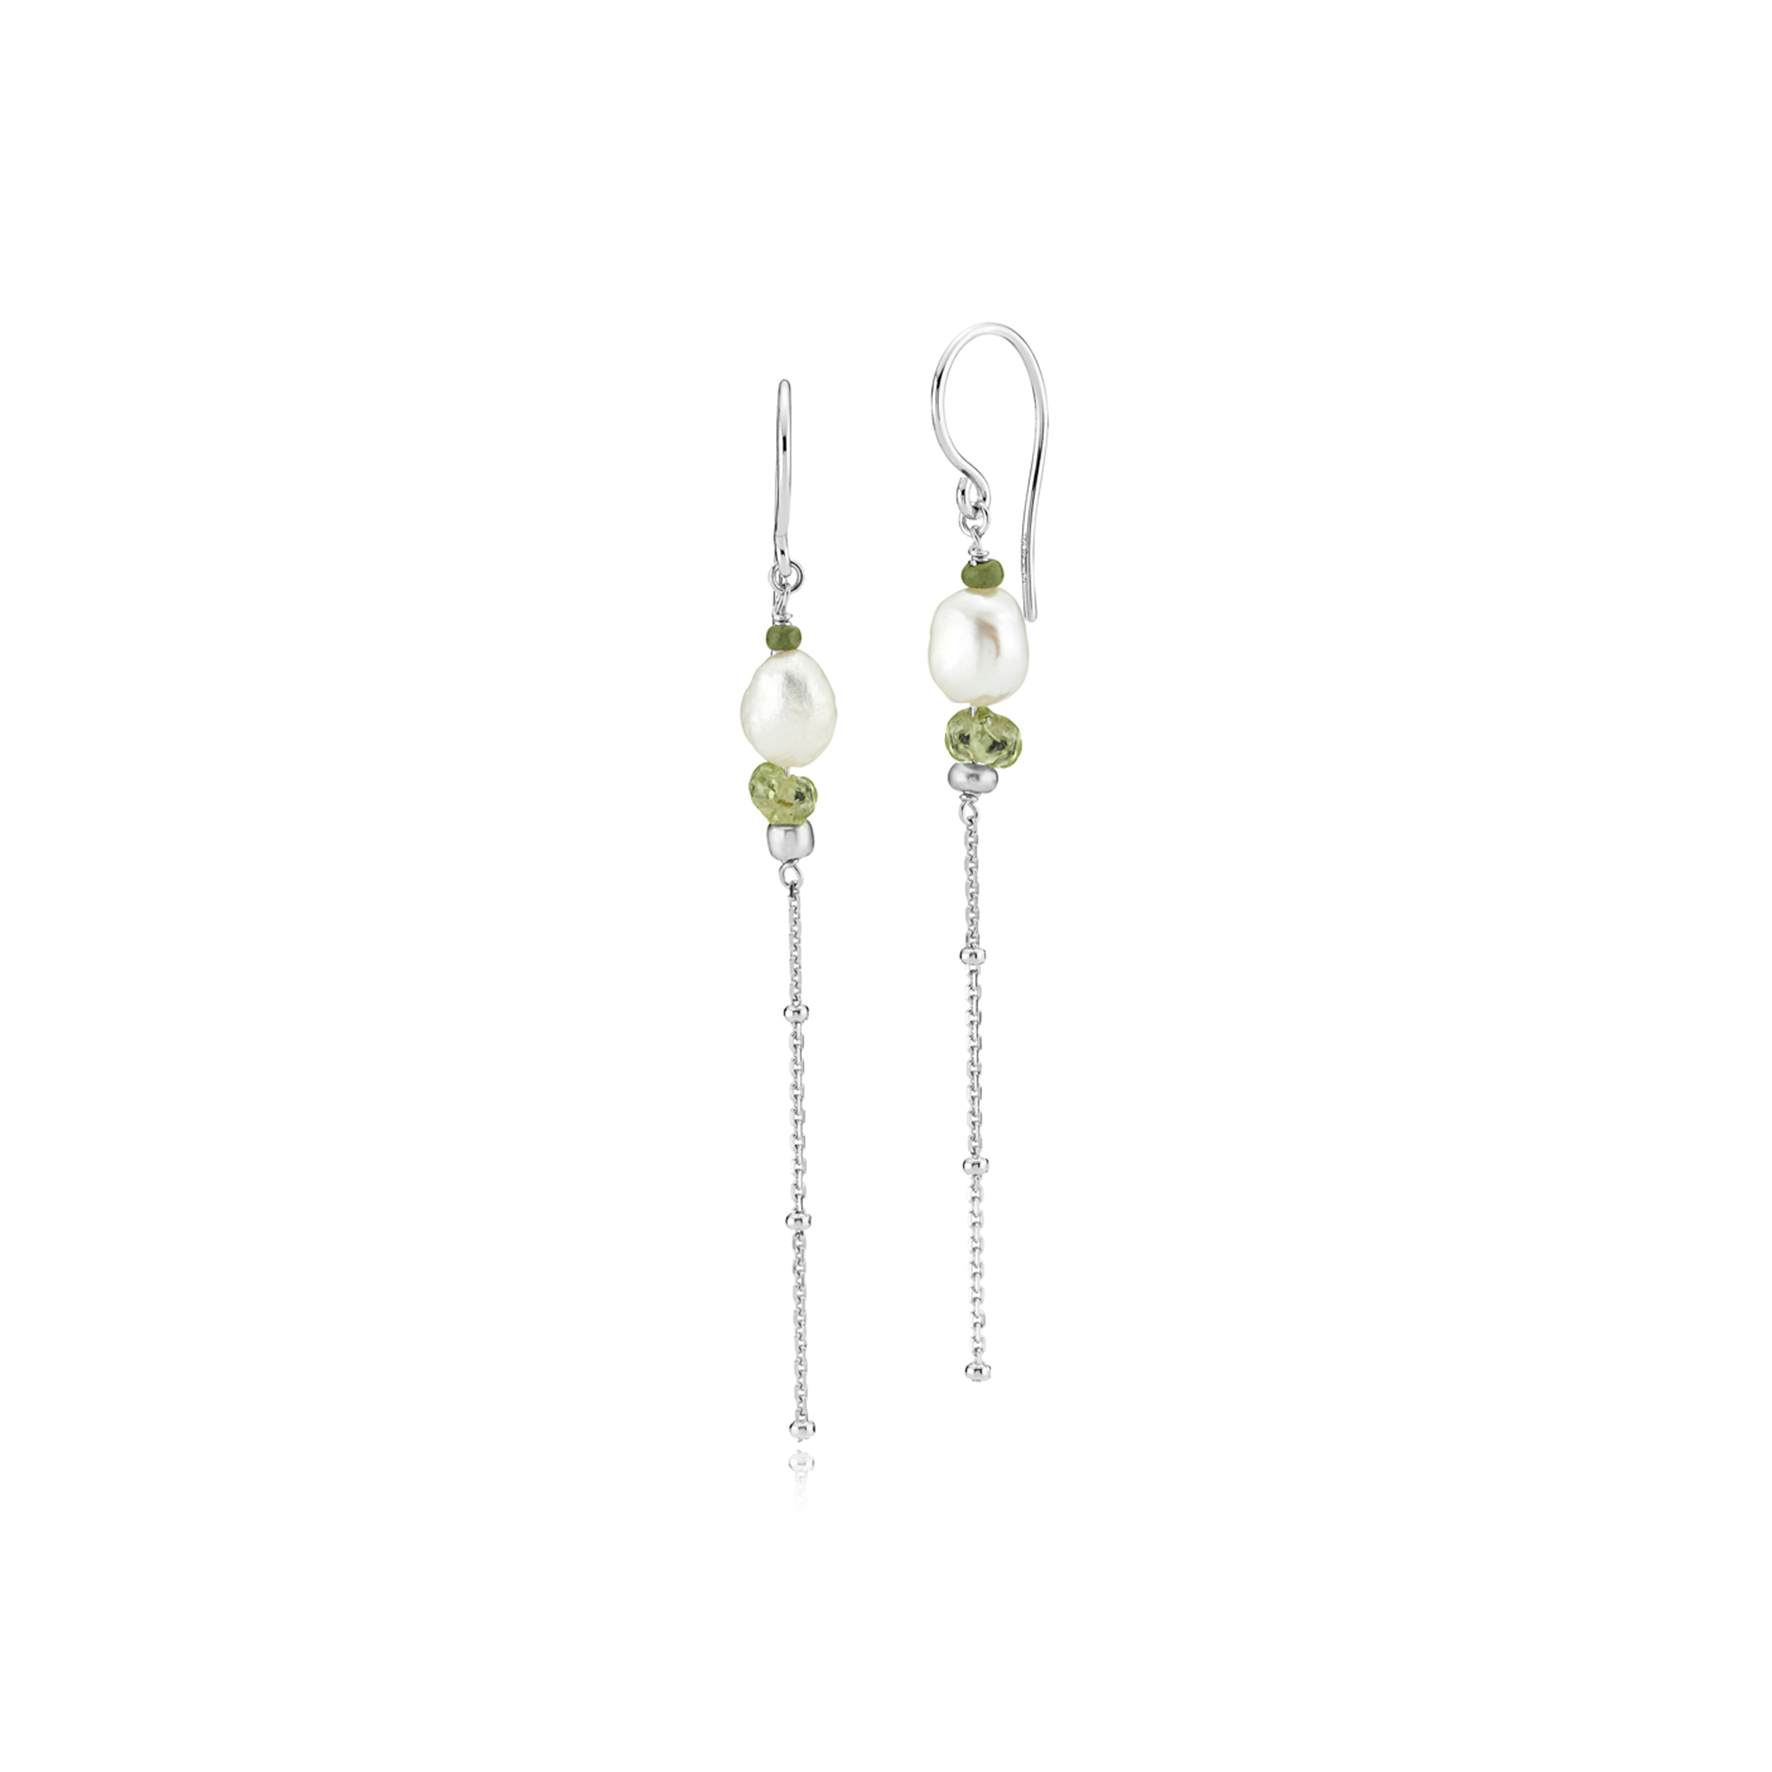 Beach Earrings Green With Pearl from Sistie in Silver Sterling 925